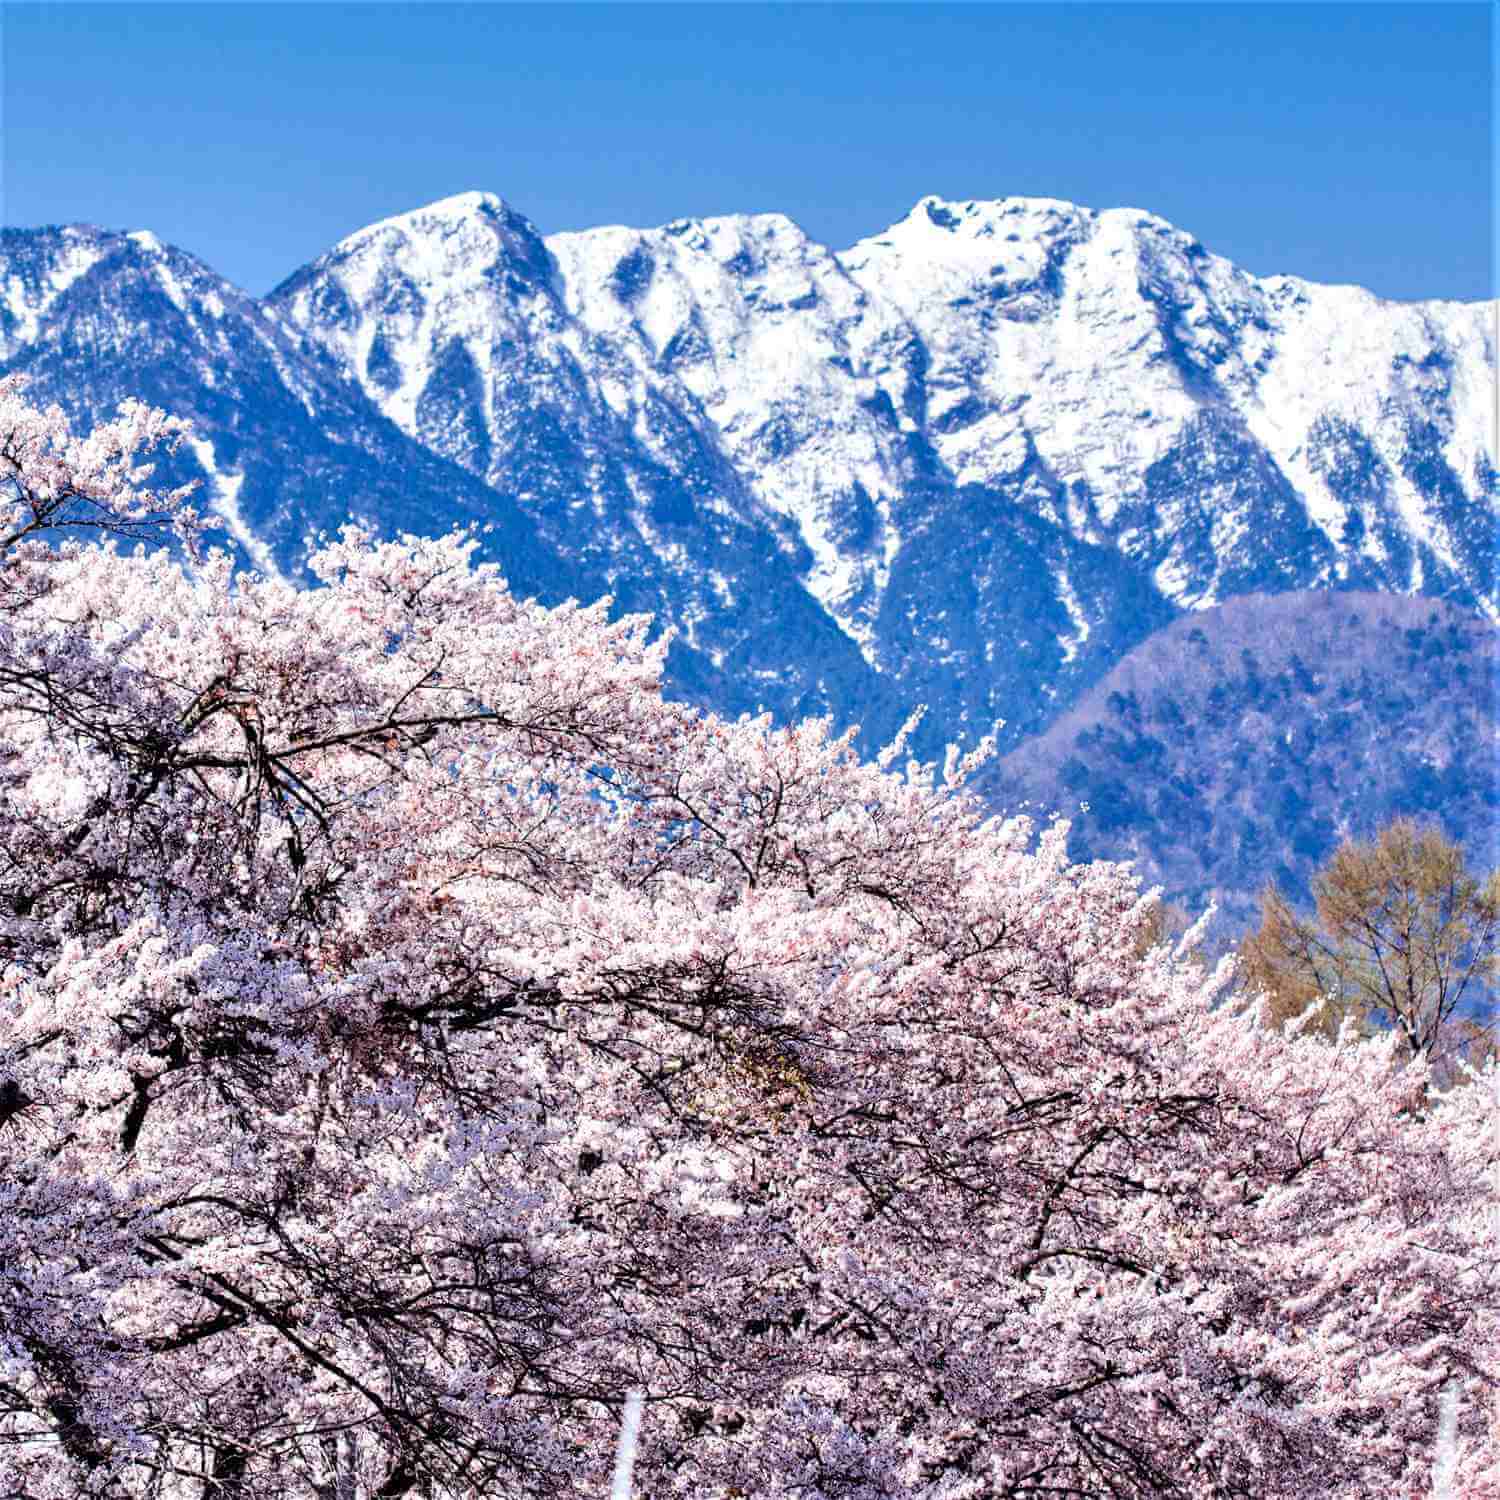 In the central part of Honshu, there is a mountainous area called "Japan Alps" with an altitude of 3000m = Shutterstock 1